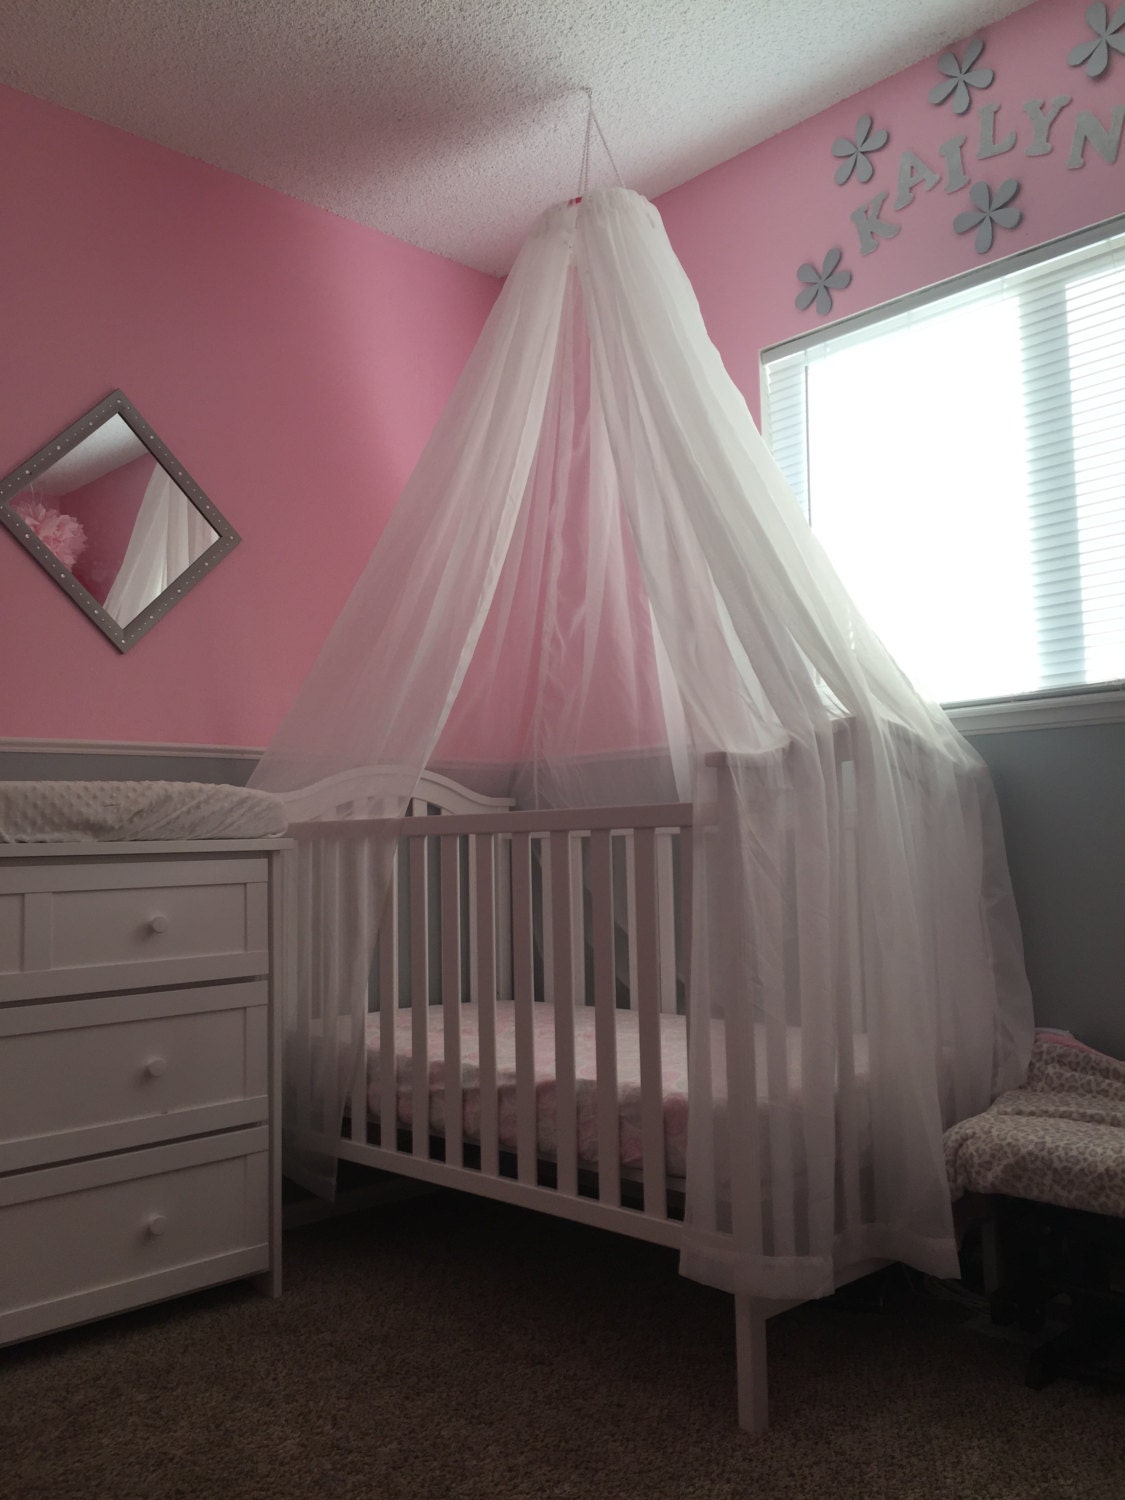 Princess bed canopy by MelissaJaneNorris on Etsy